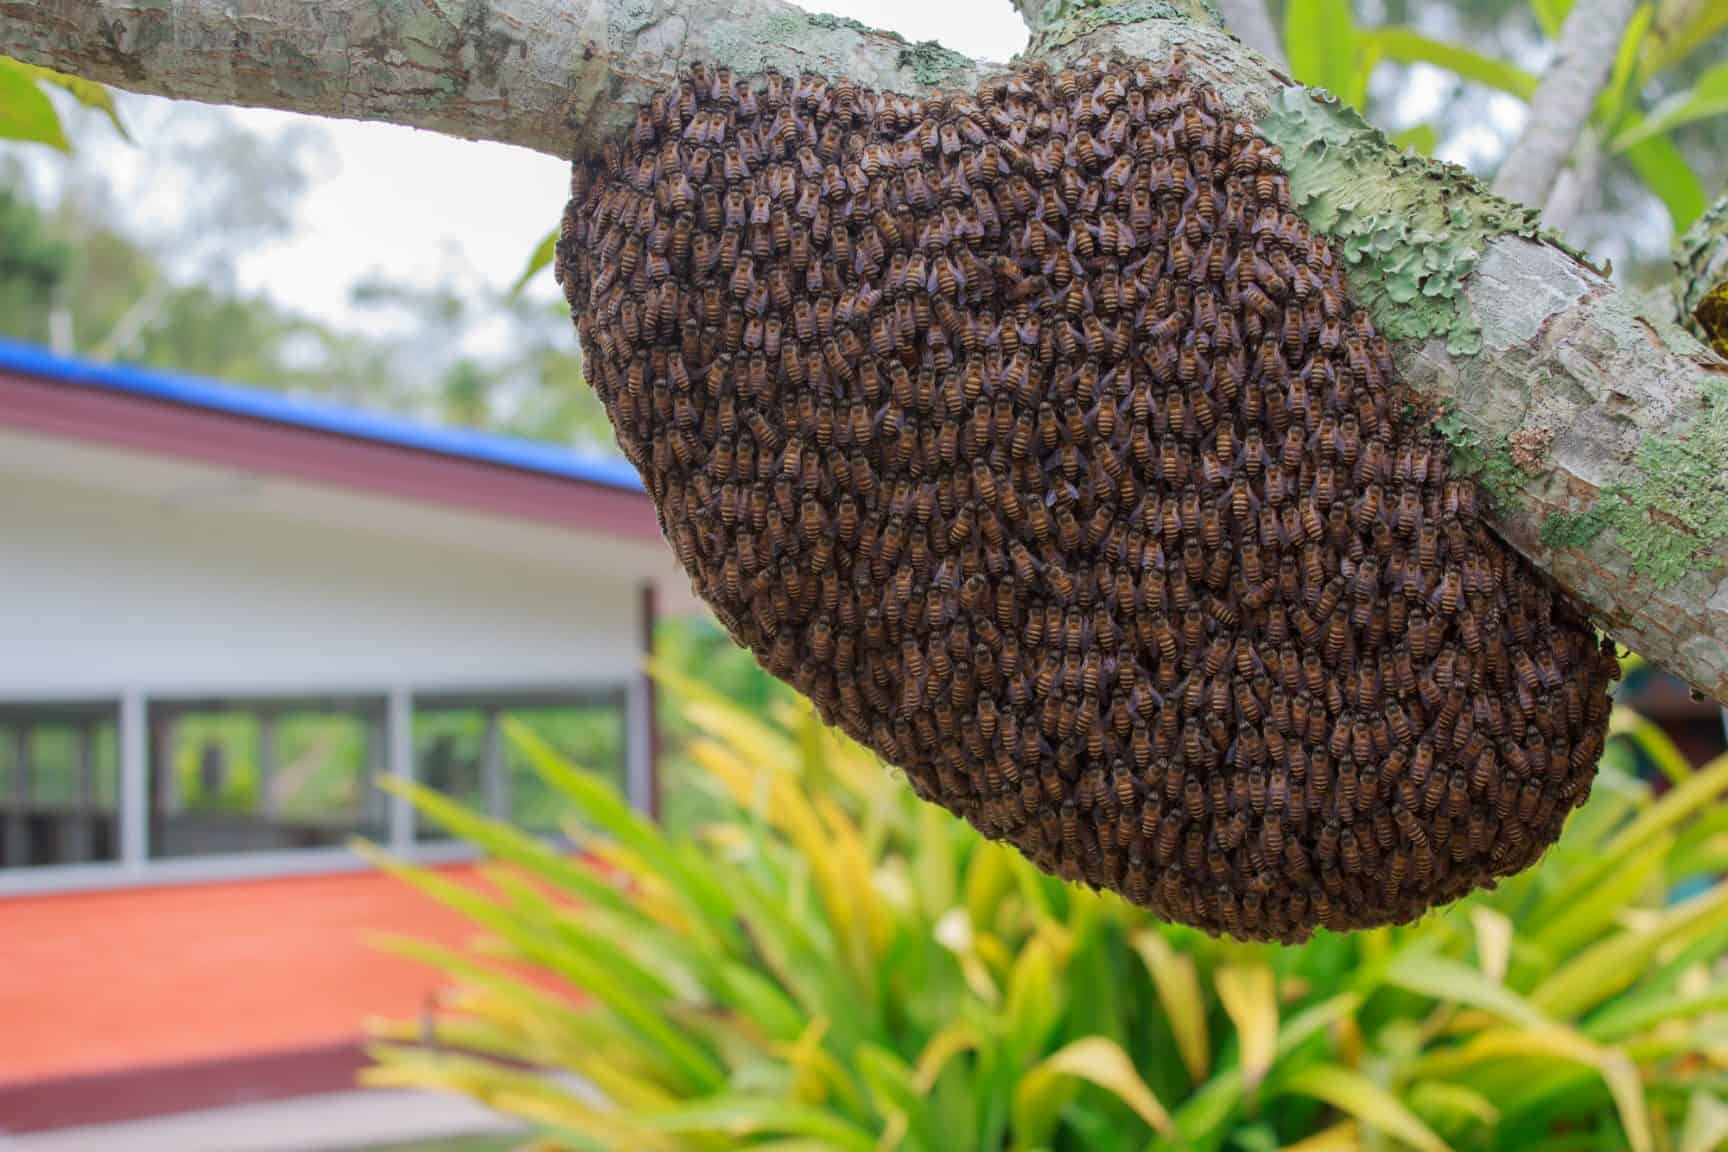 capturing-and-installing-a-swarm-of-bees